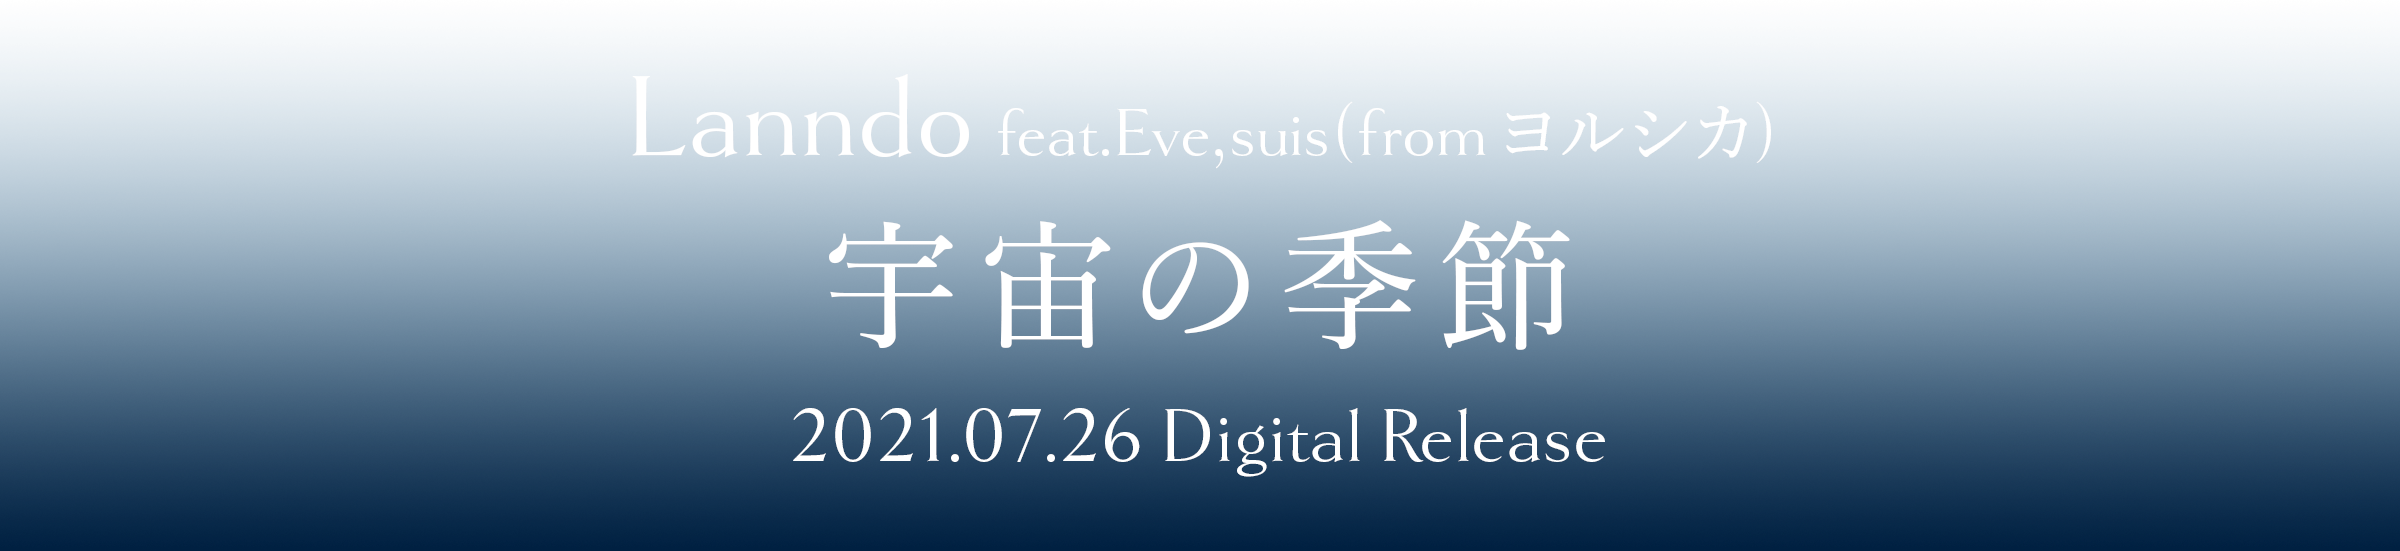 Lanndo feat.Eve,suis(from ヨルシカ) 『宇宙の季節』 2021.07.26 Digital Release